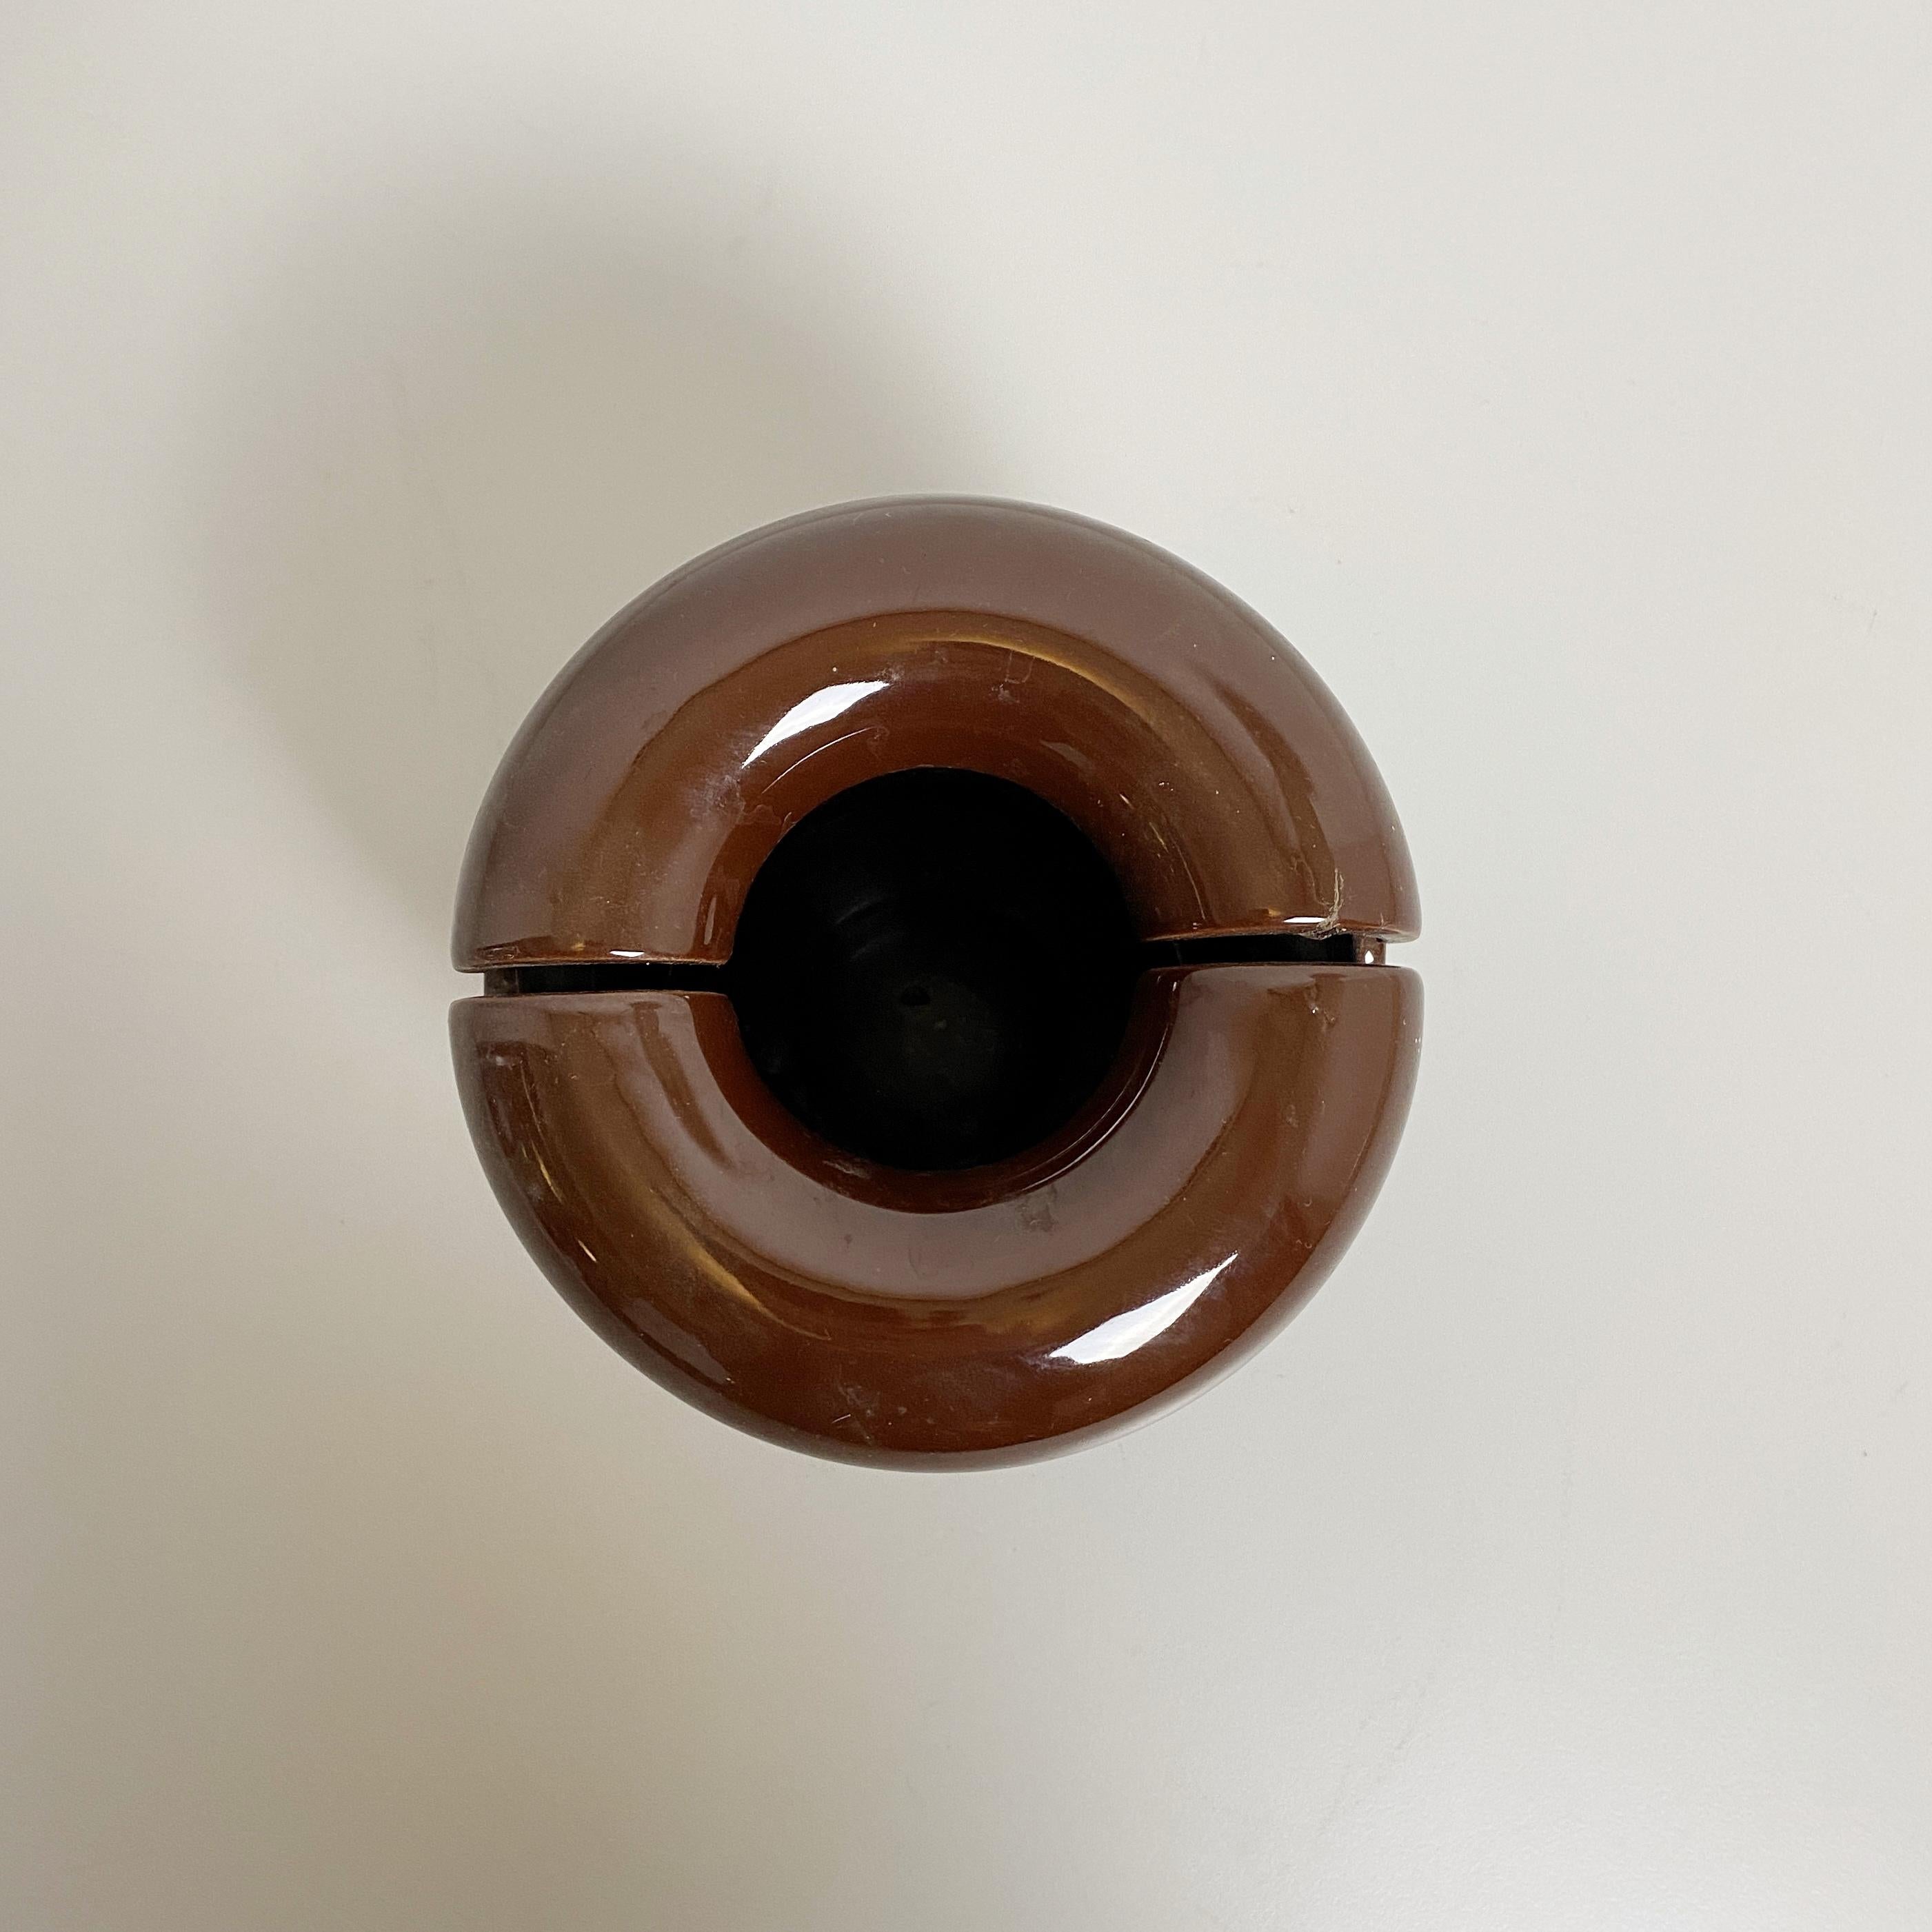 Italian Mid-Century Modern Brown Ceramic Vase by Lineareorm, 1960s For Sale 2